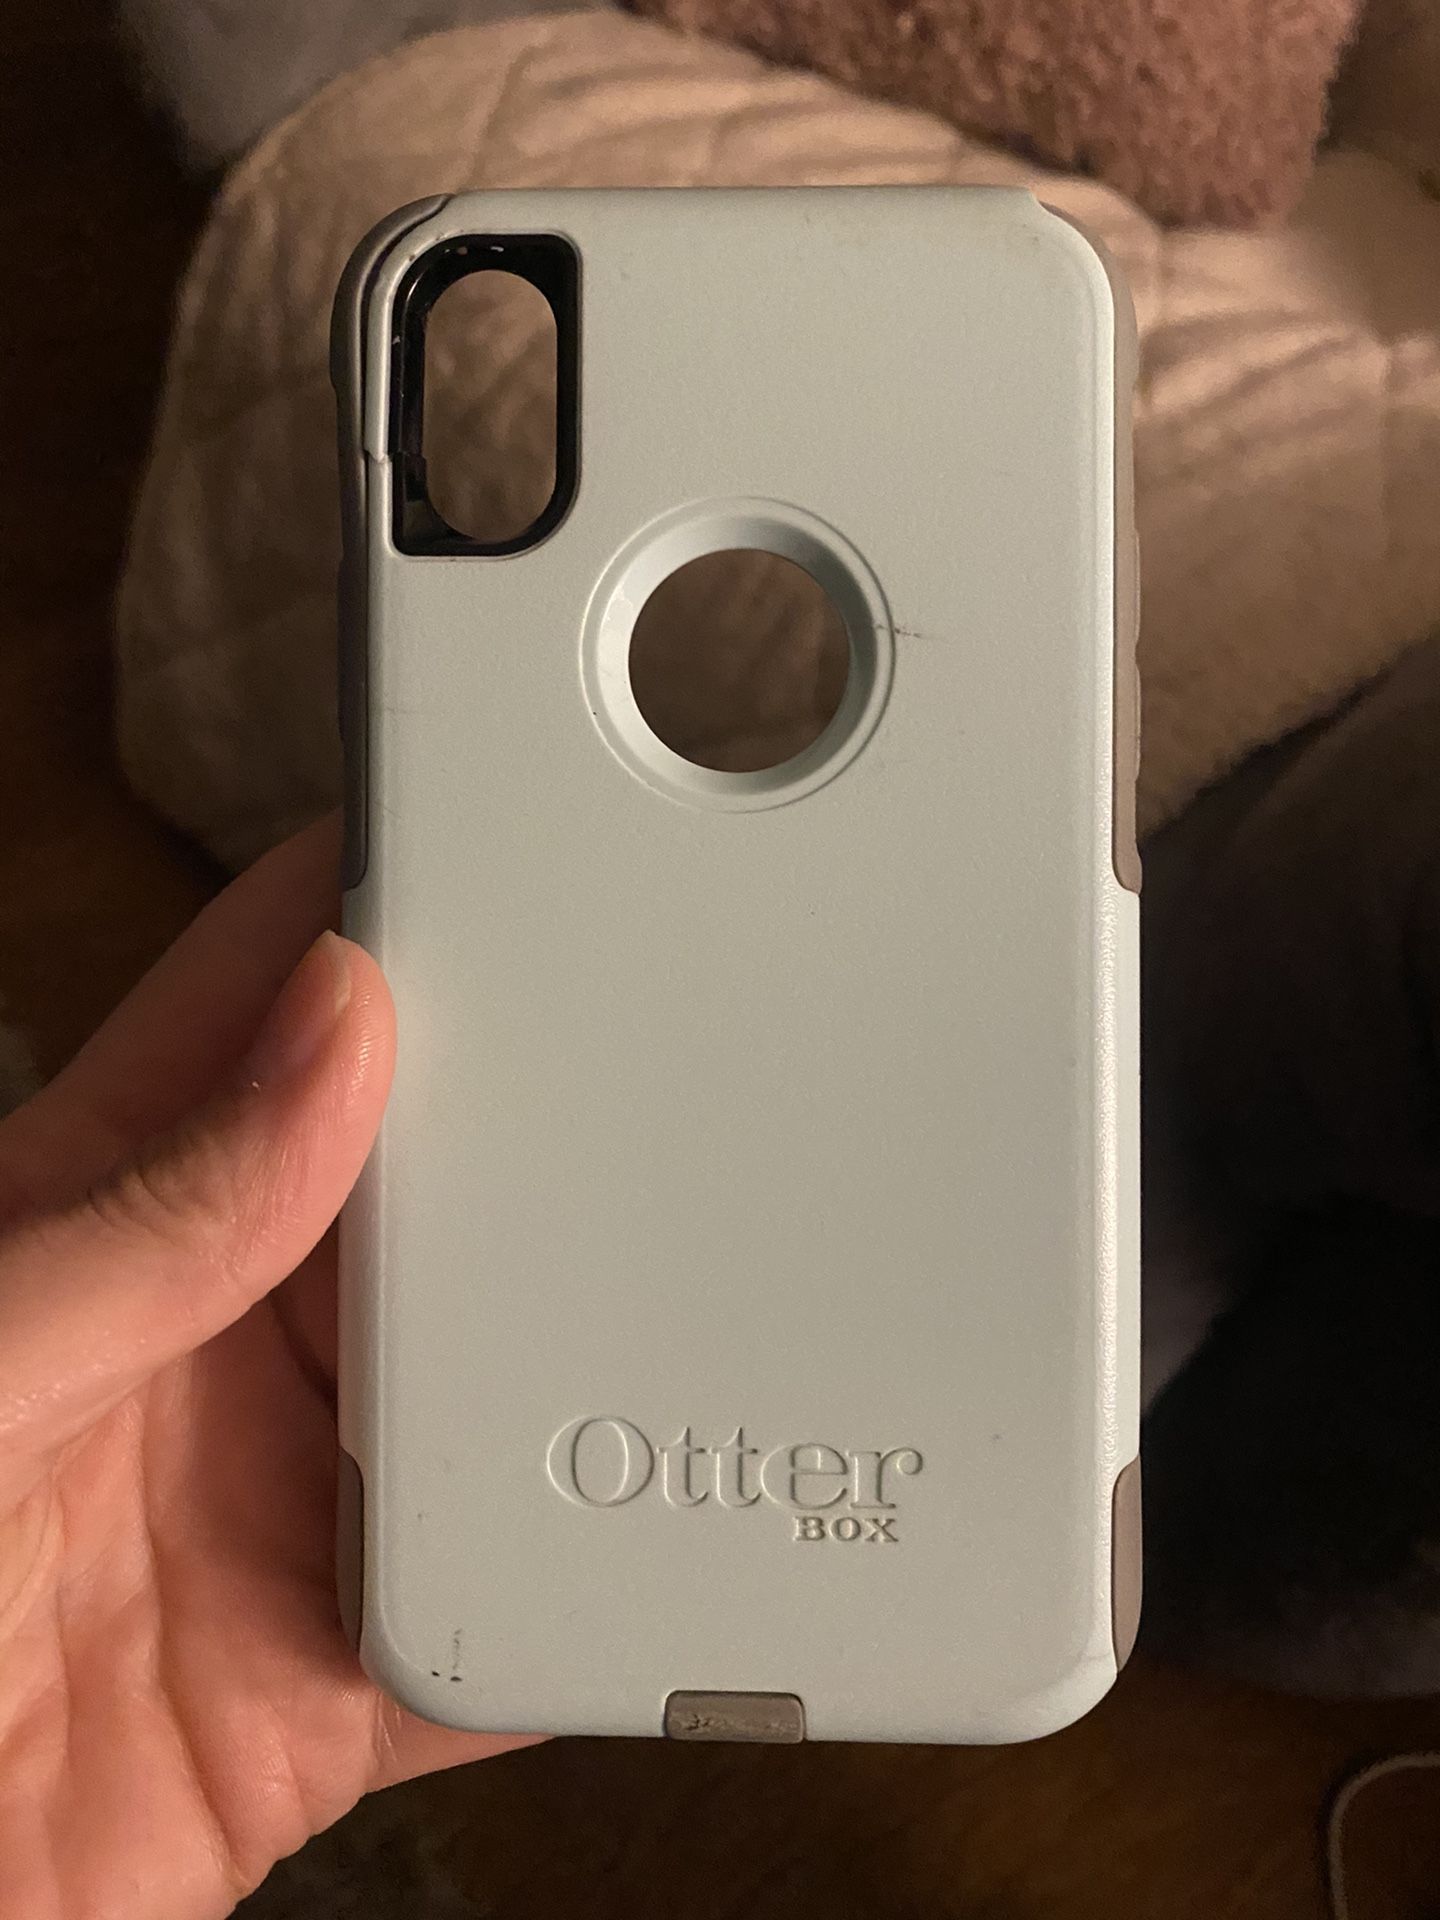 iPhone X with otter box case